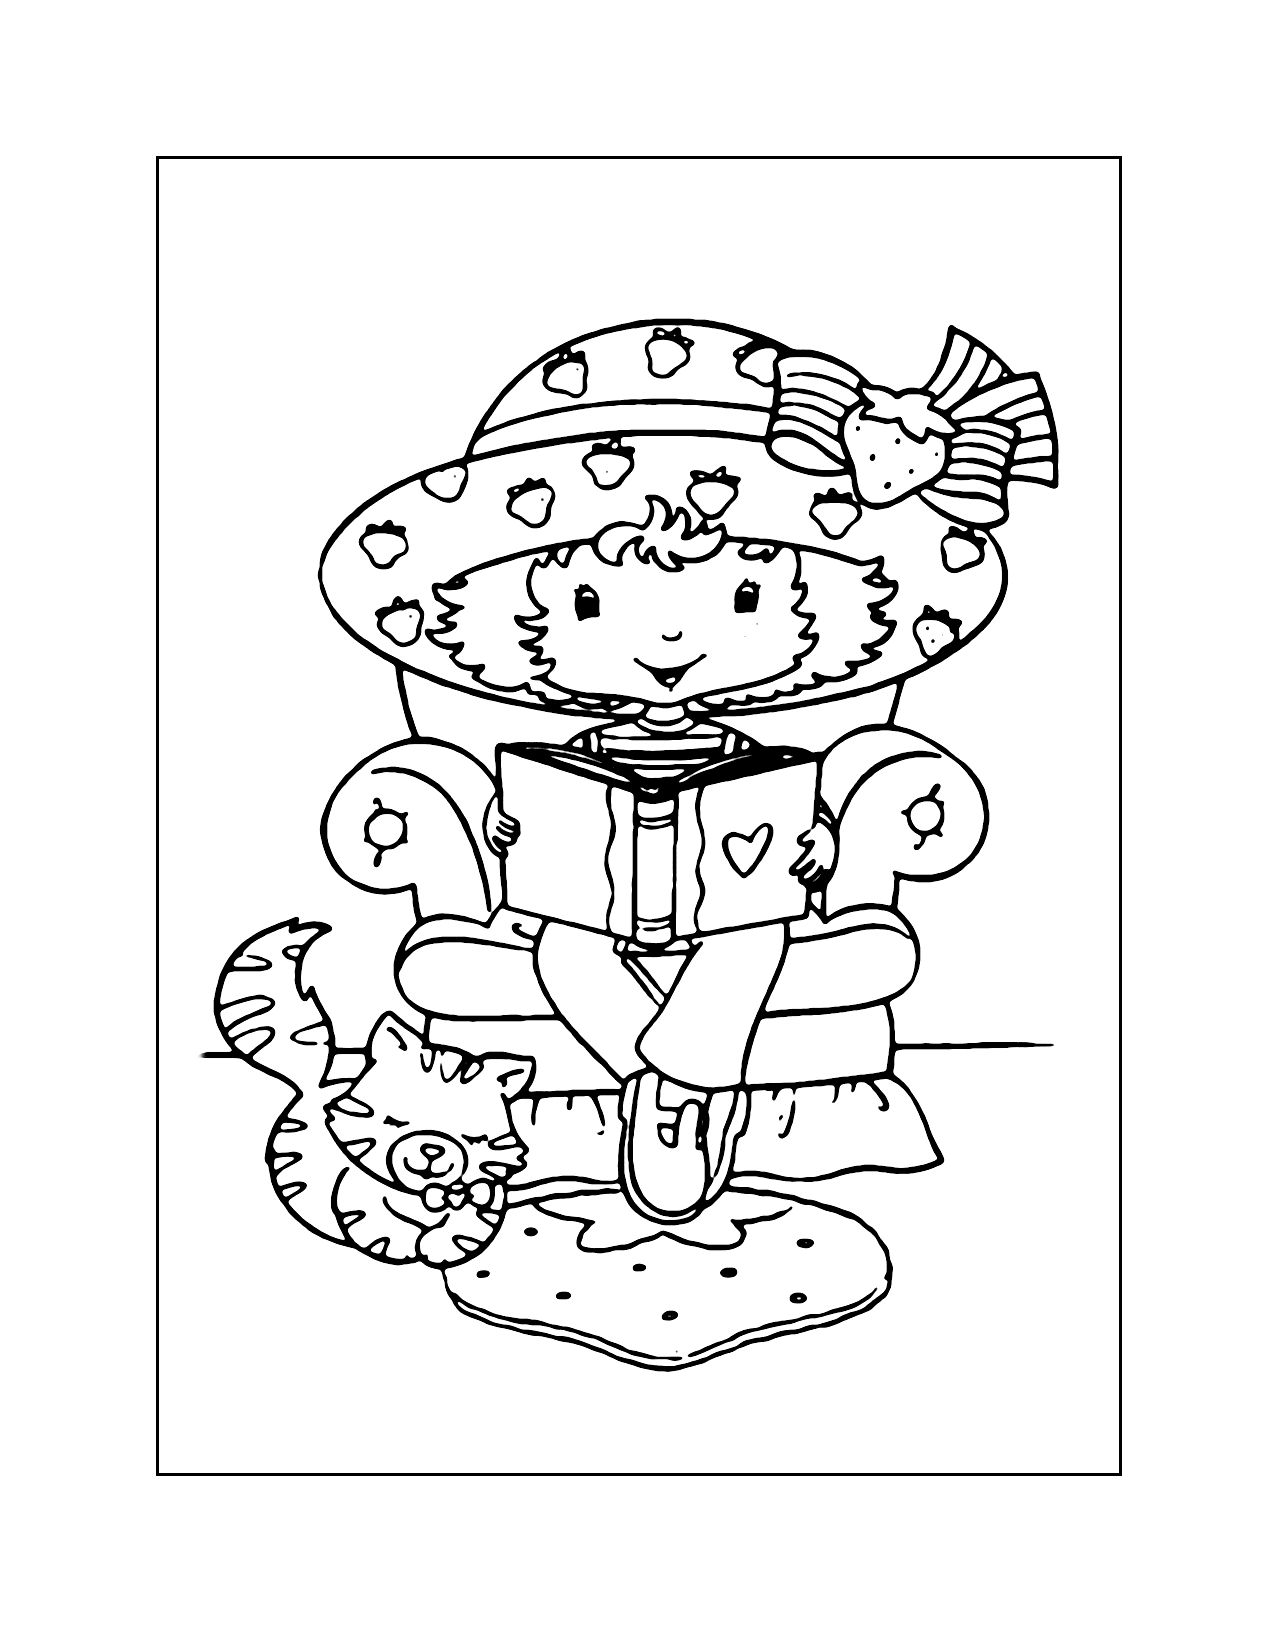 Strawberry Shortcake Reading A Book Coloring Page